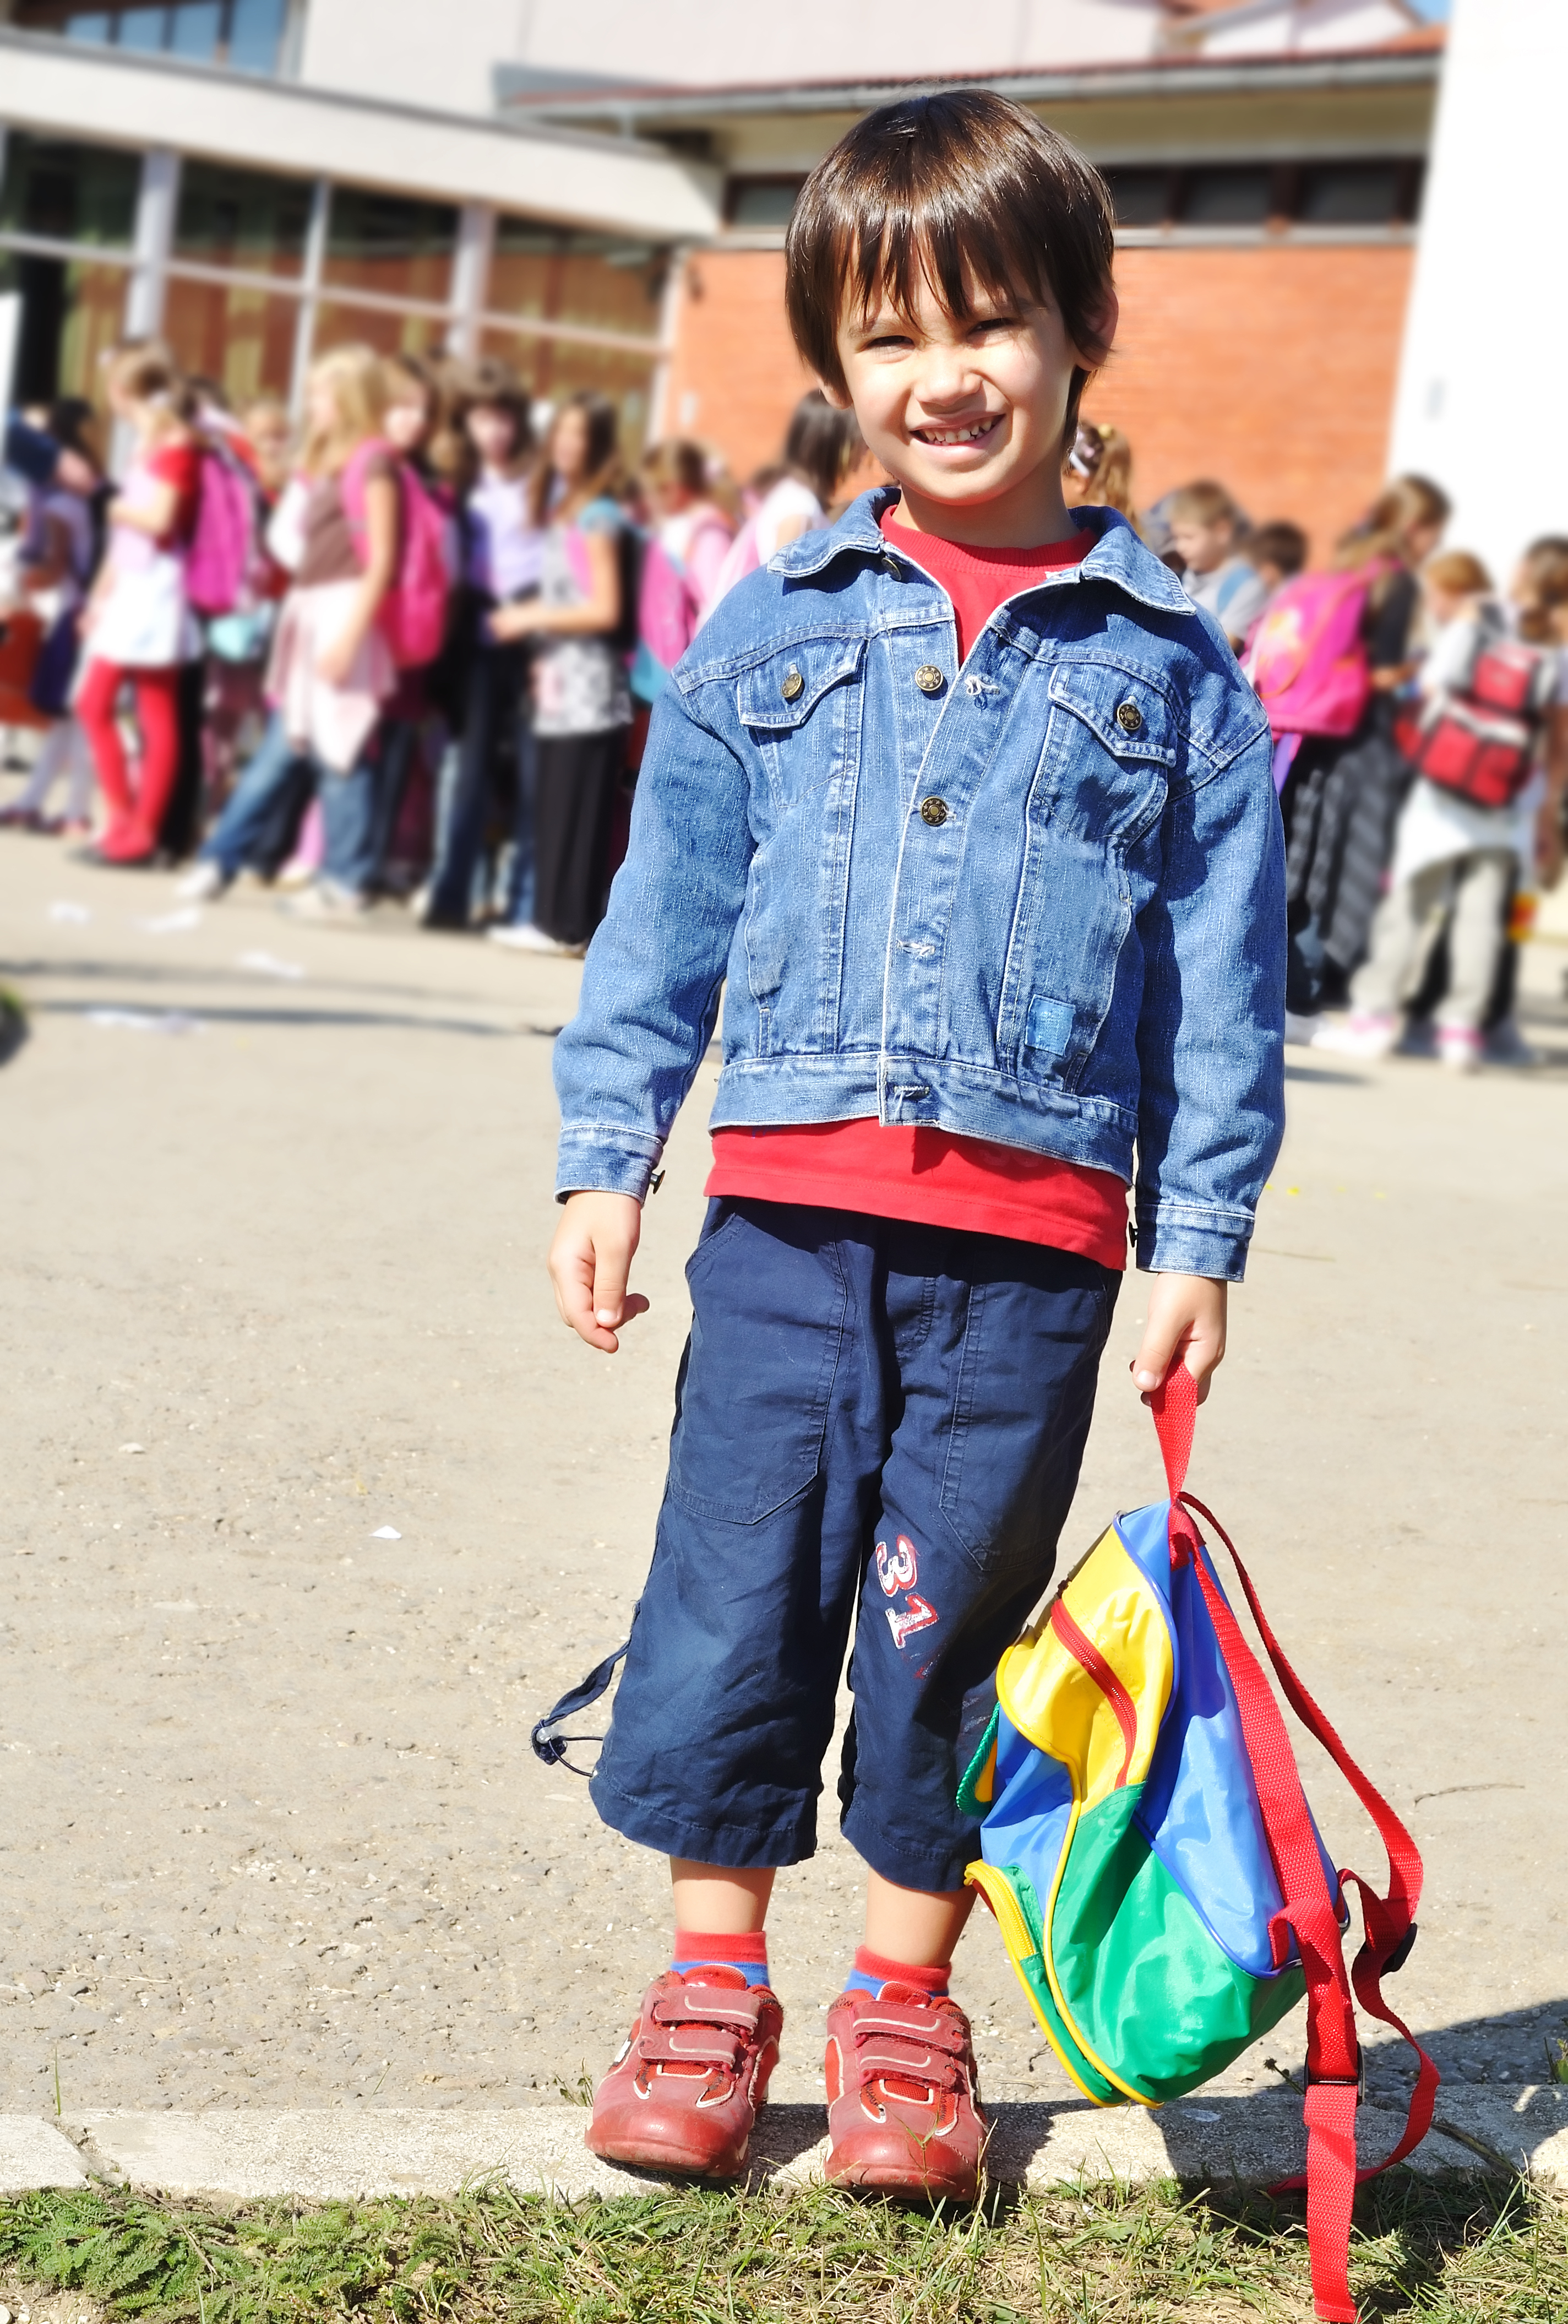 kindergarten student holds backpack and smiles while waiting to go into the school Open Gallery